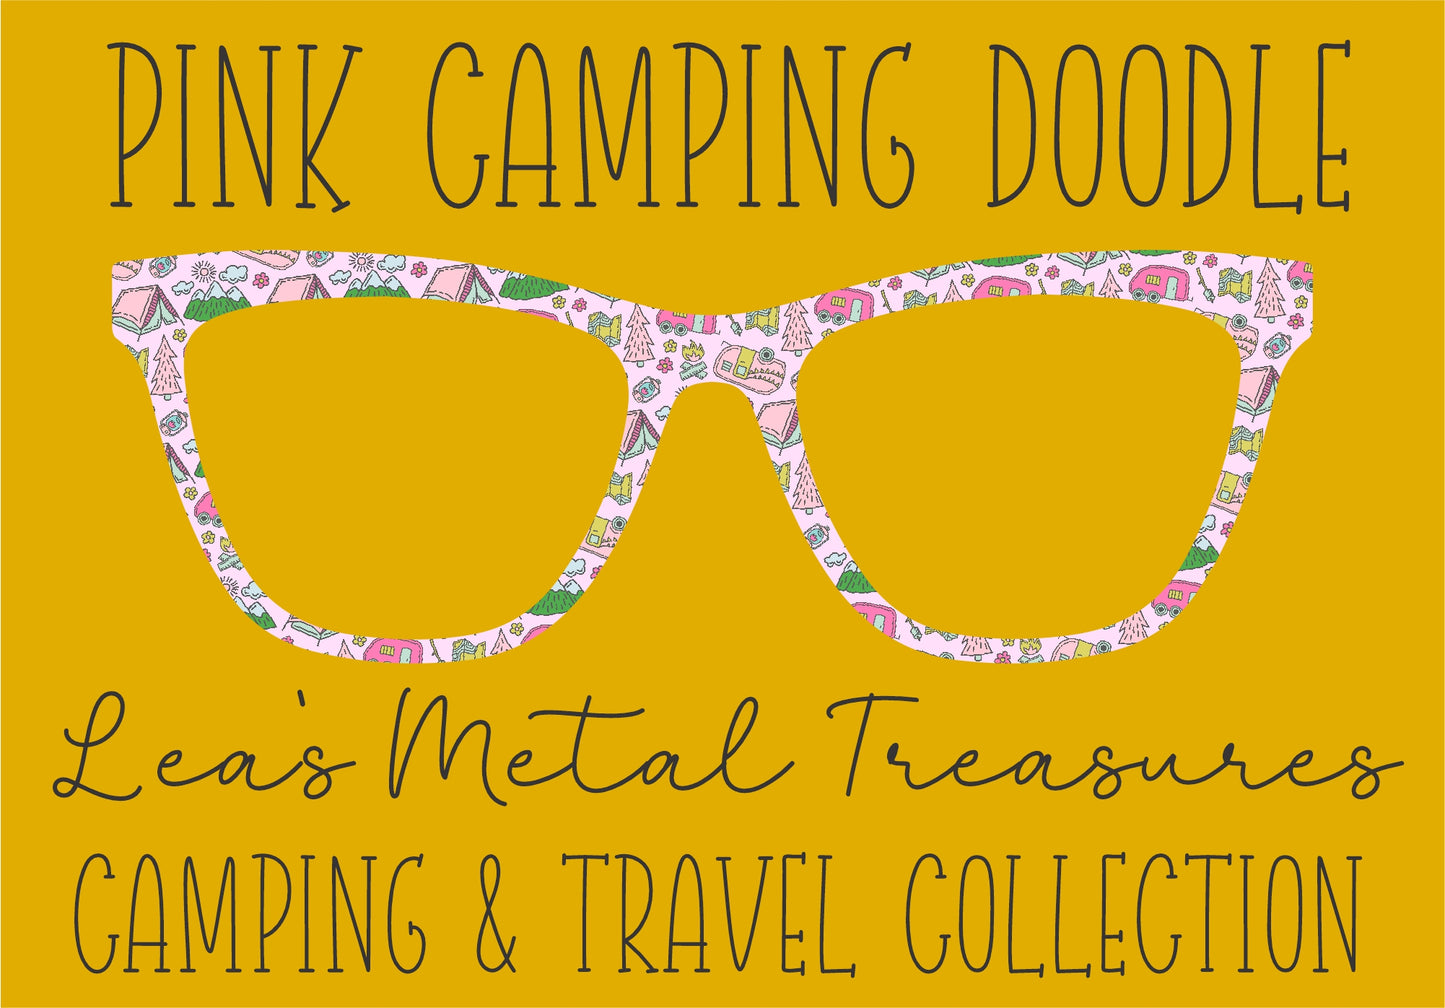 PINK CAMPING DOODLE Eyewear Frame Toppers COMES WITH MAGNETS